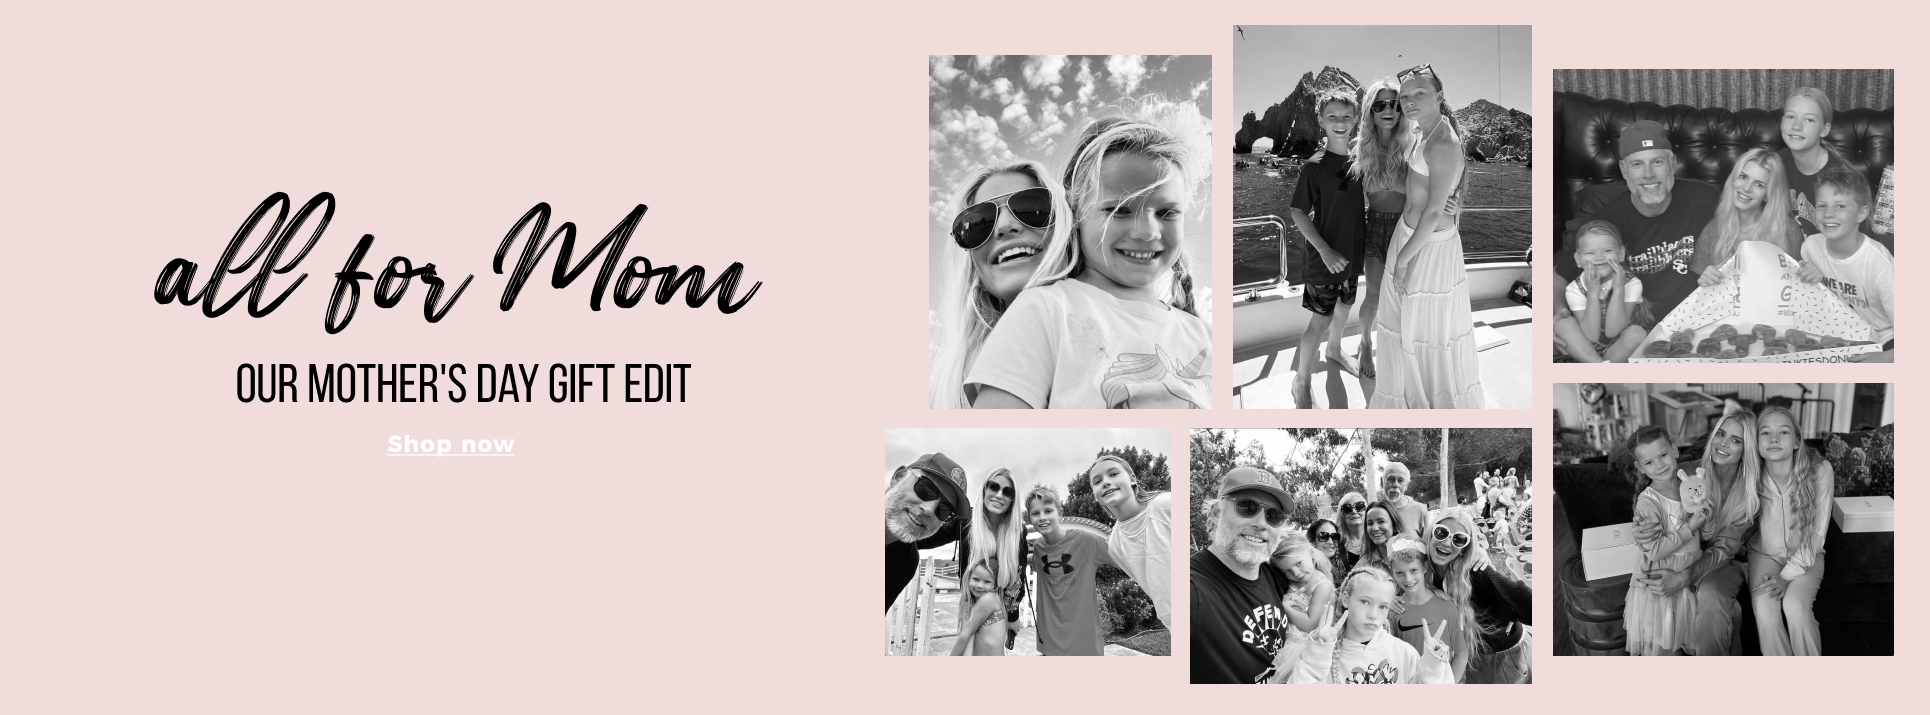 All for mom our mother's day gift edit shop now